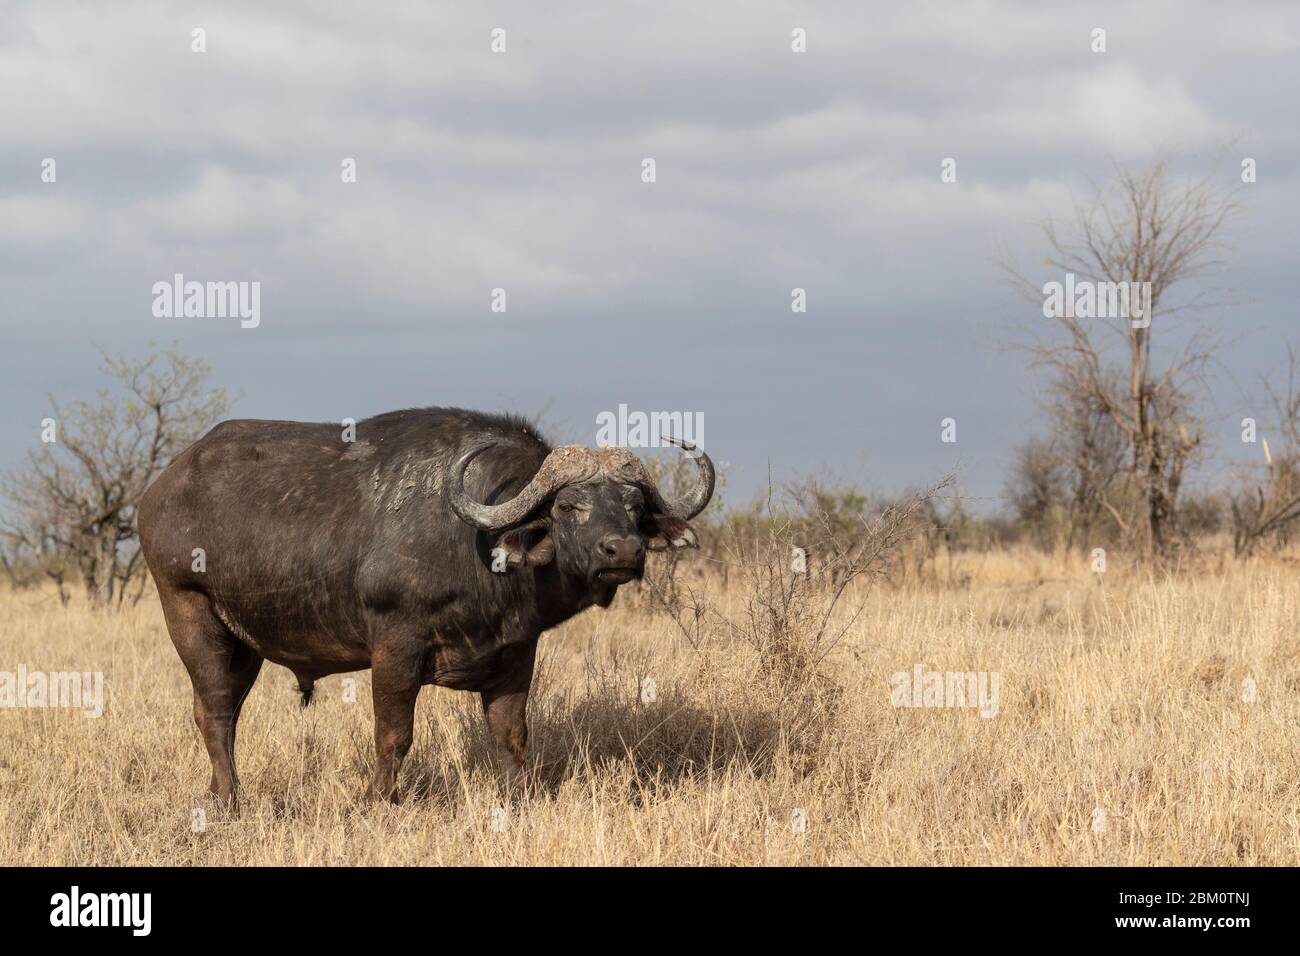 Capo bufalo (Syncerus cafer), Parco nazionale Kruger, Sudafrica, Foto Stock